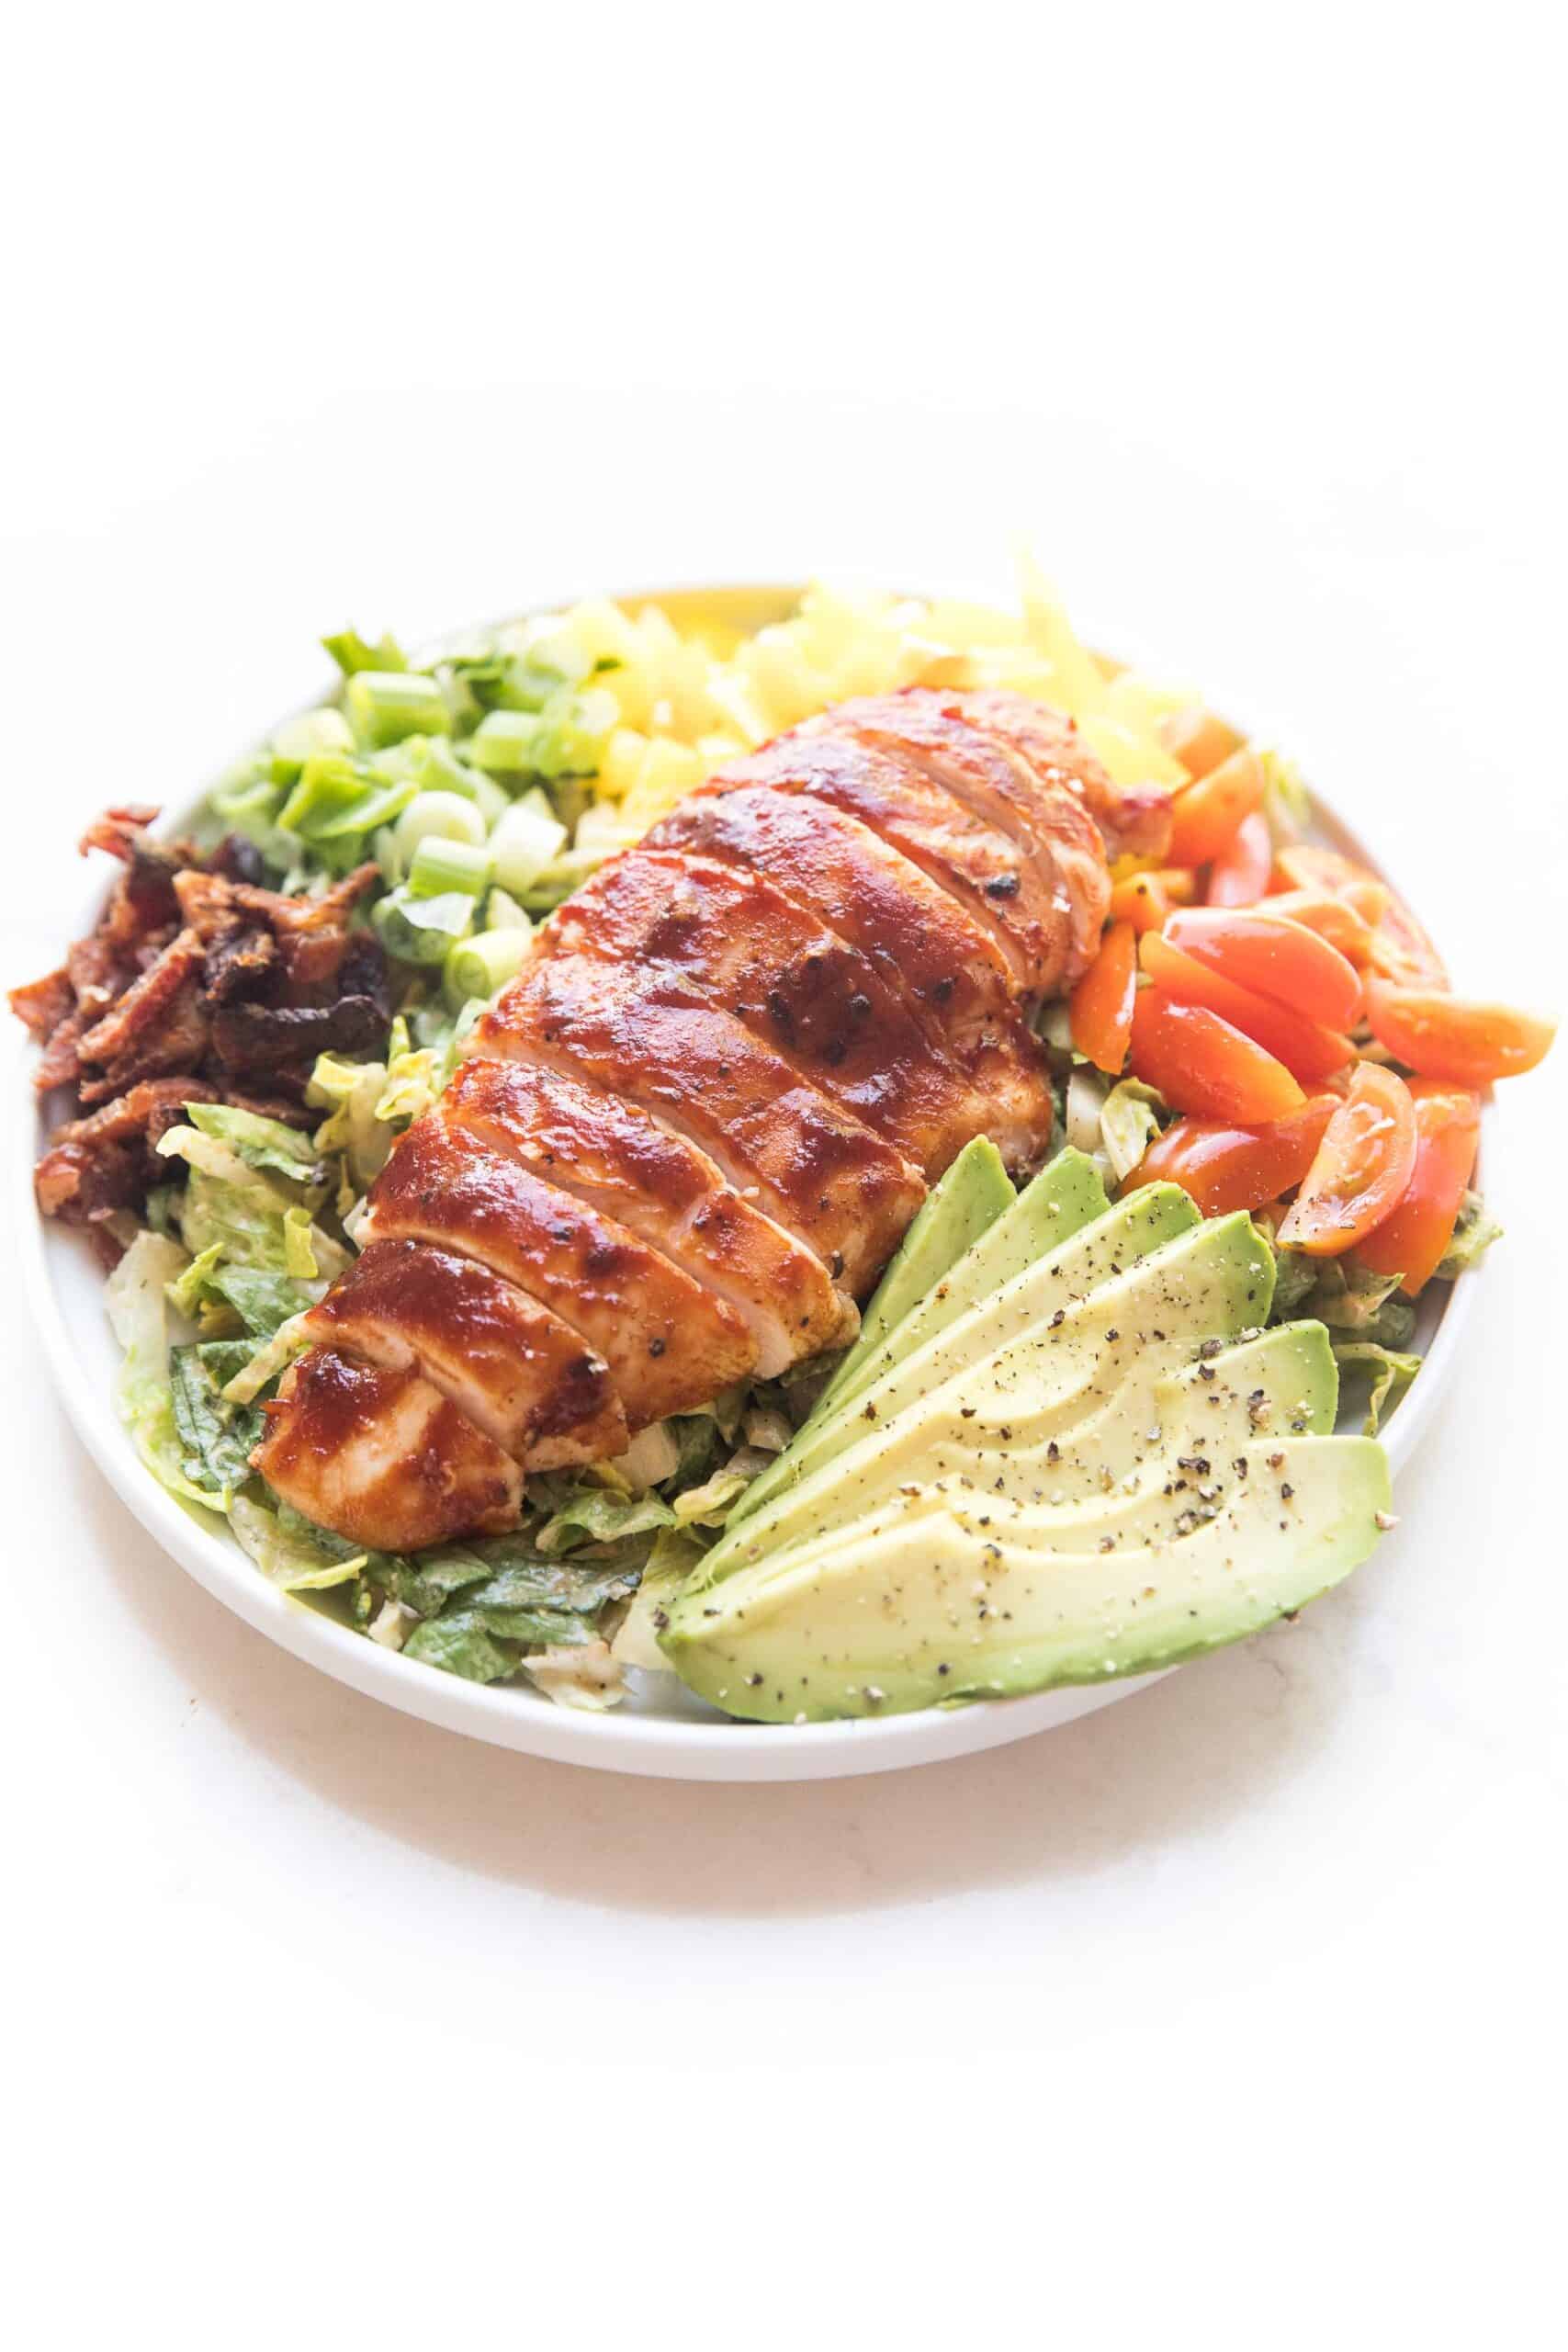 bbq chicken salad with avocado, bacon, bell pepper, tomatoes and green onions on a white plate and background